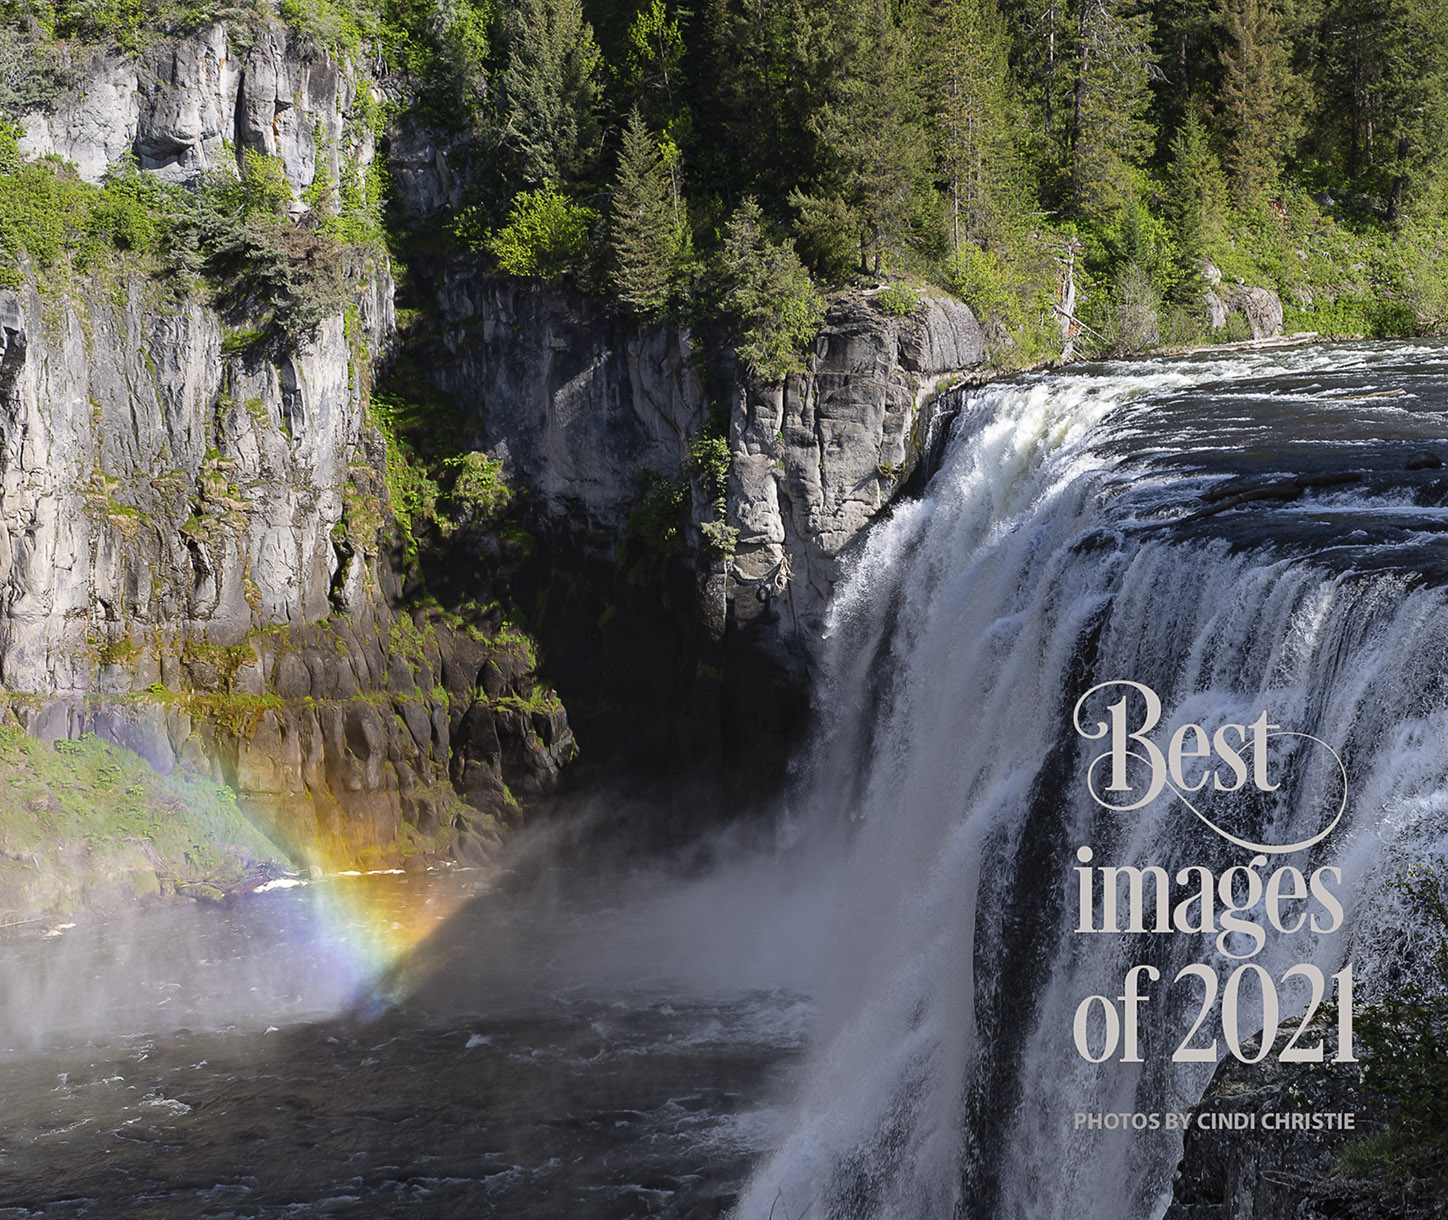 Best Images book cover